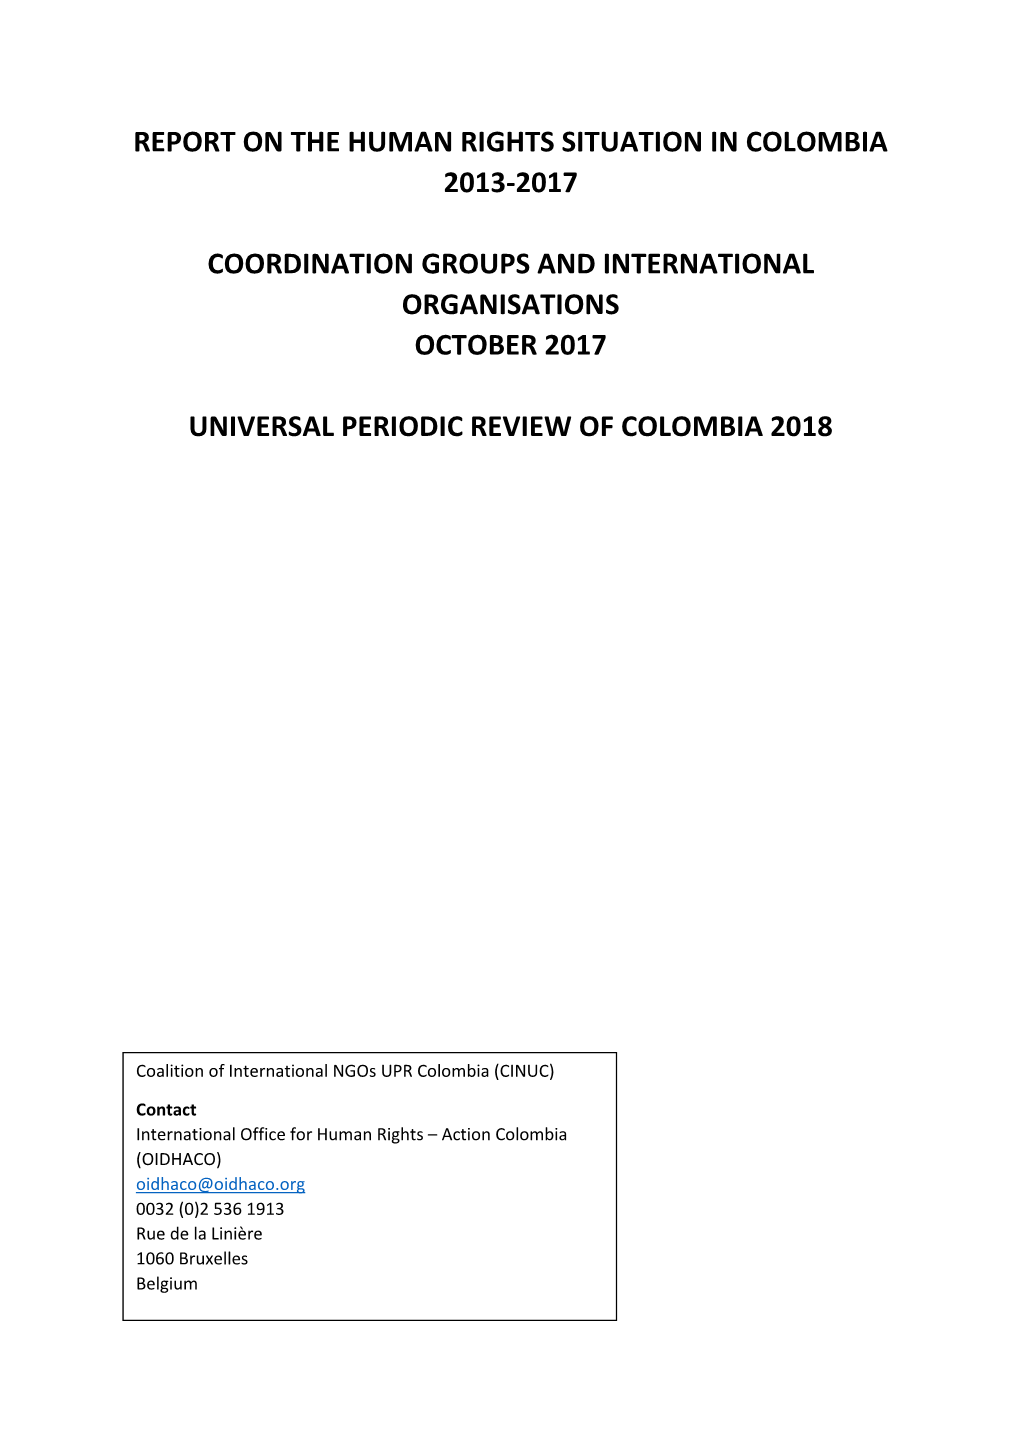 Report on the Human Rights Situation in Colombia 2013-2017